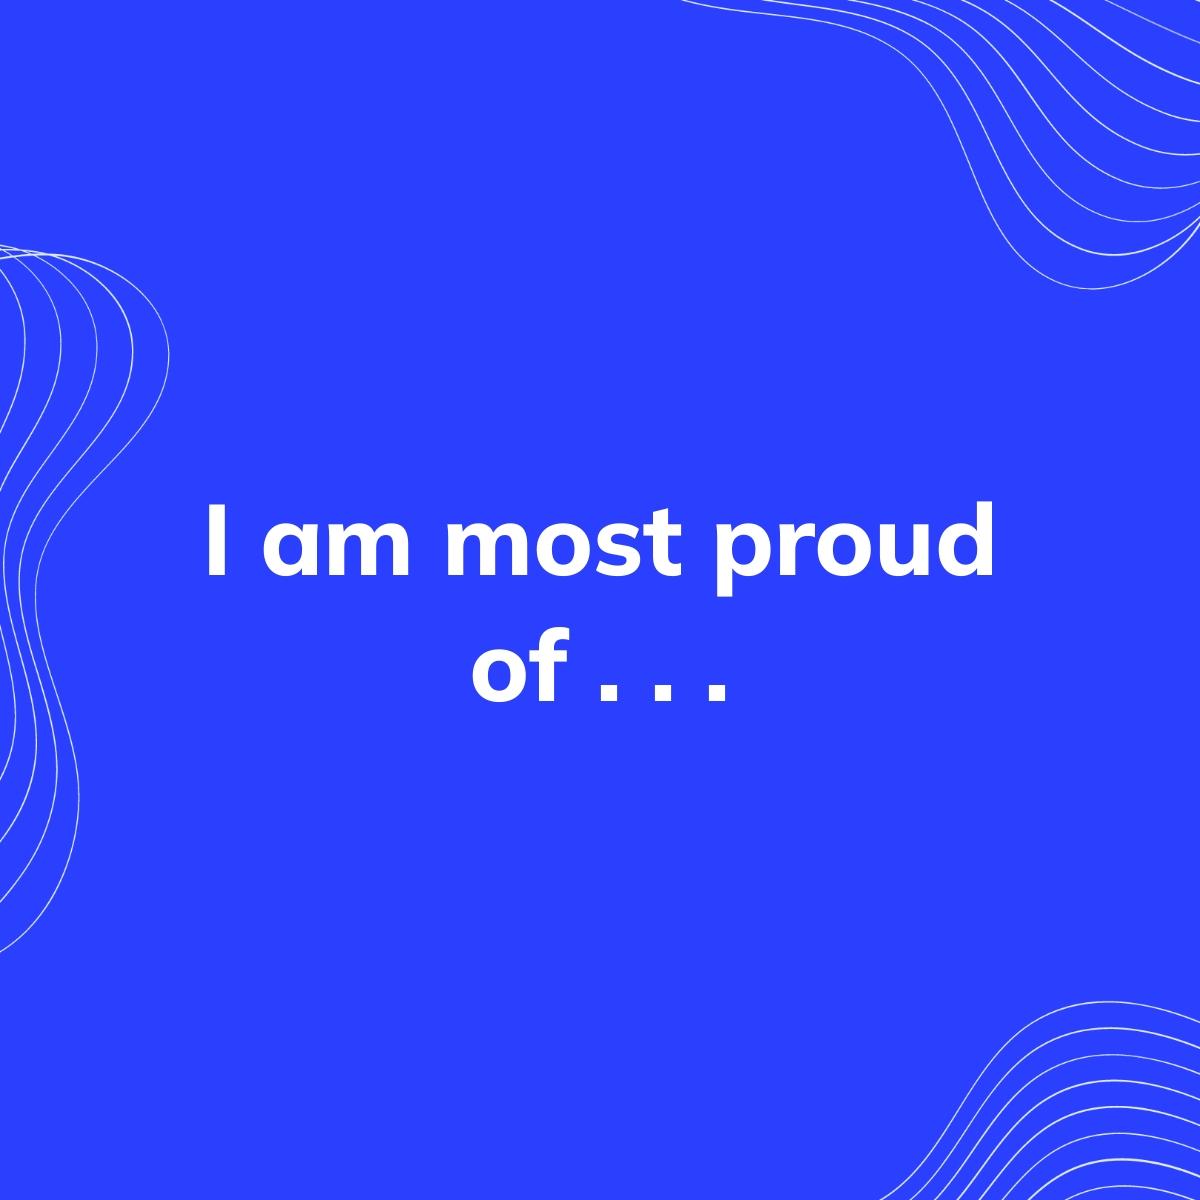 Journal Prompt: I am most proud of . . .